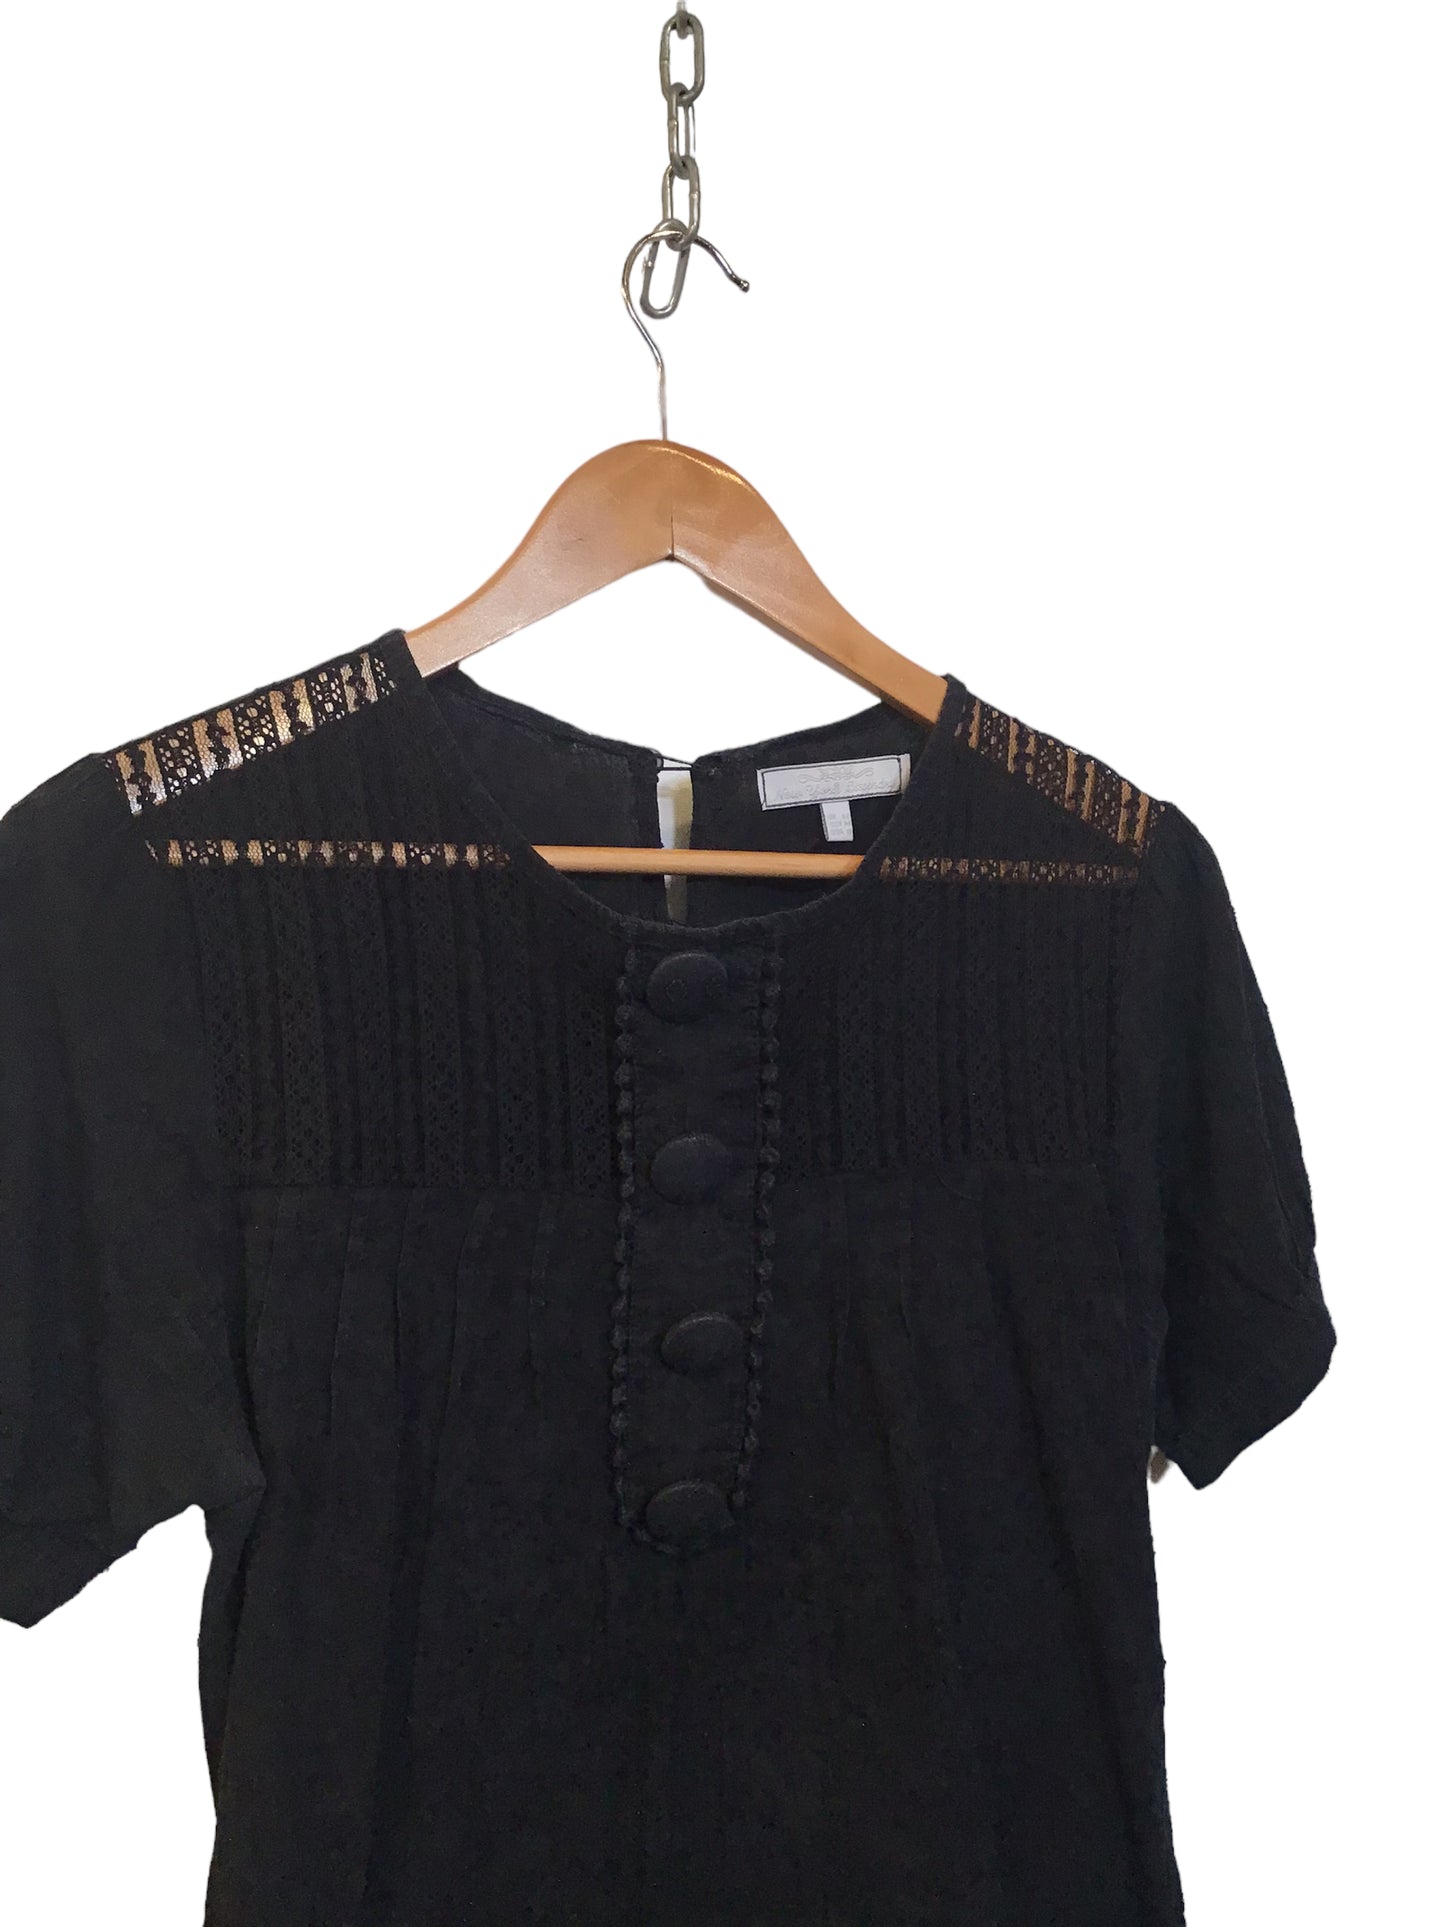 New York Laundry Top (Size L)